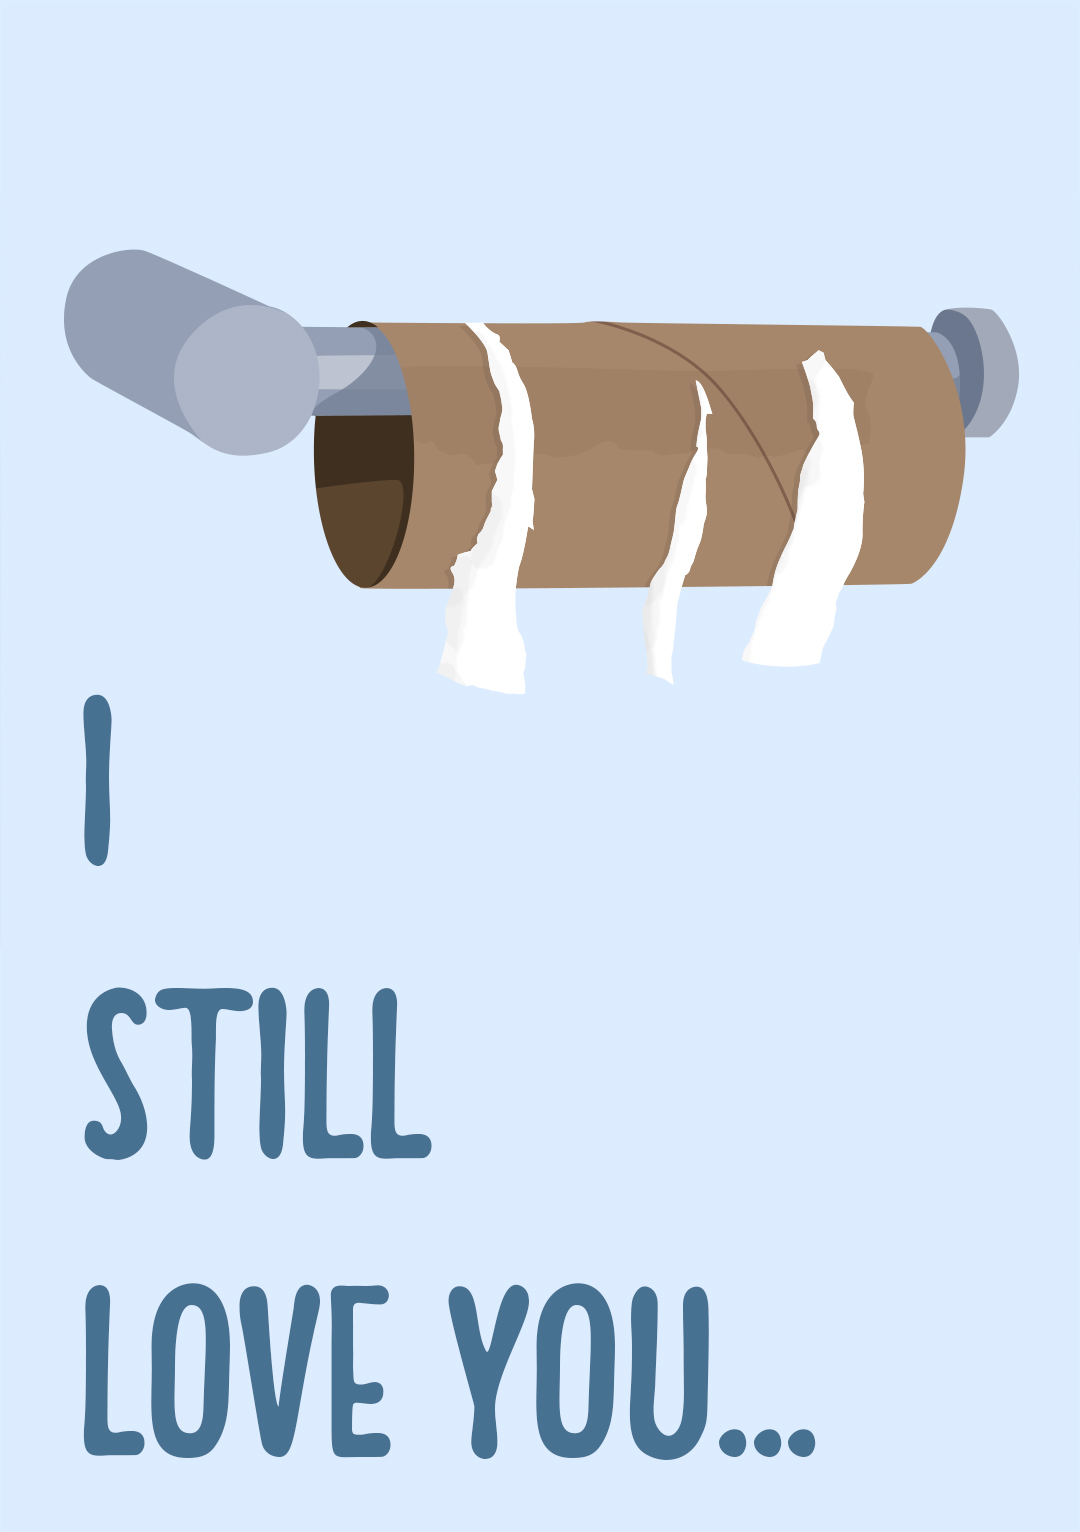 I Still Love You... - Funny Empty Toilet Roll Greeting Card